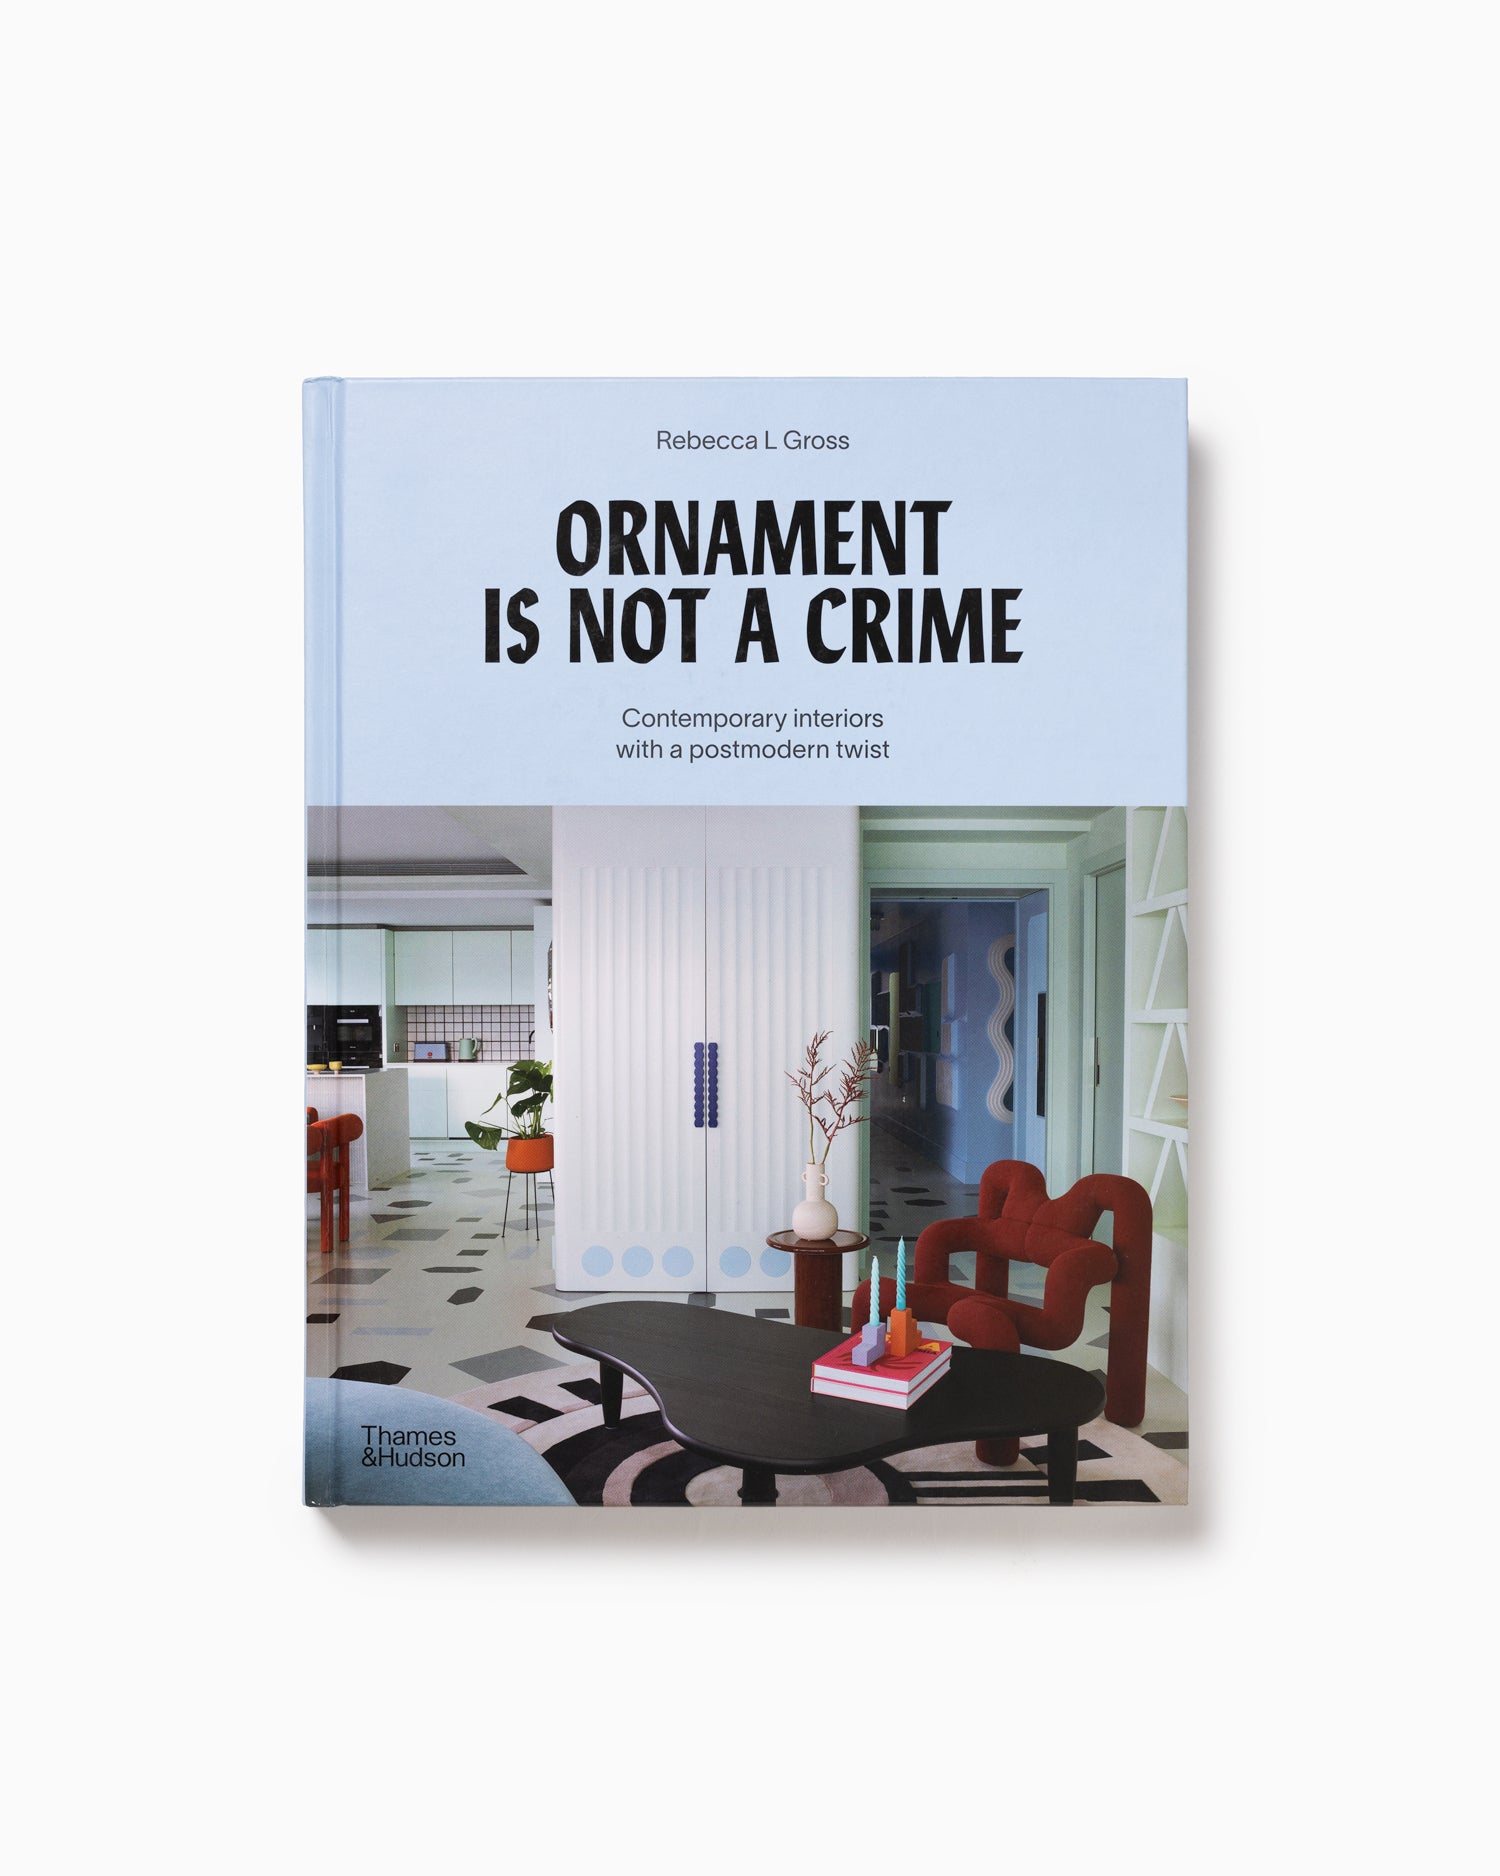 Ornament is not a Crime